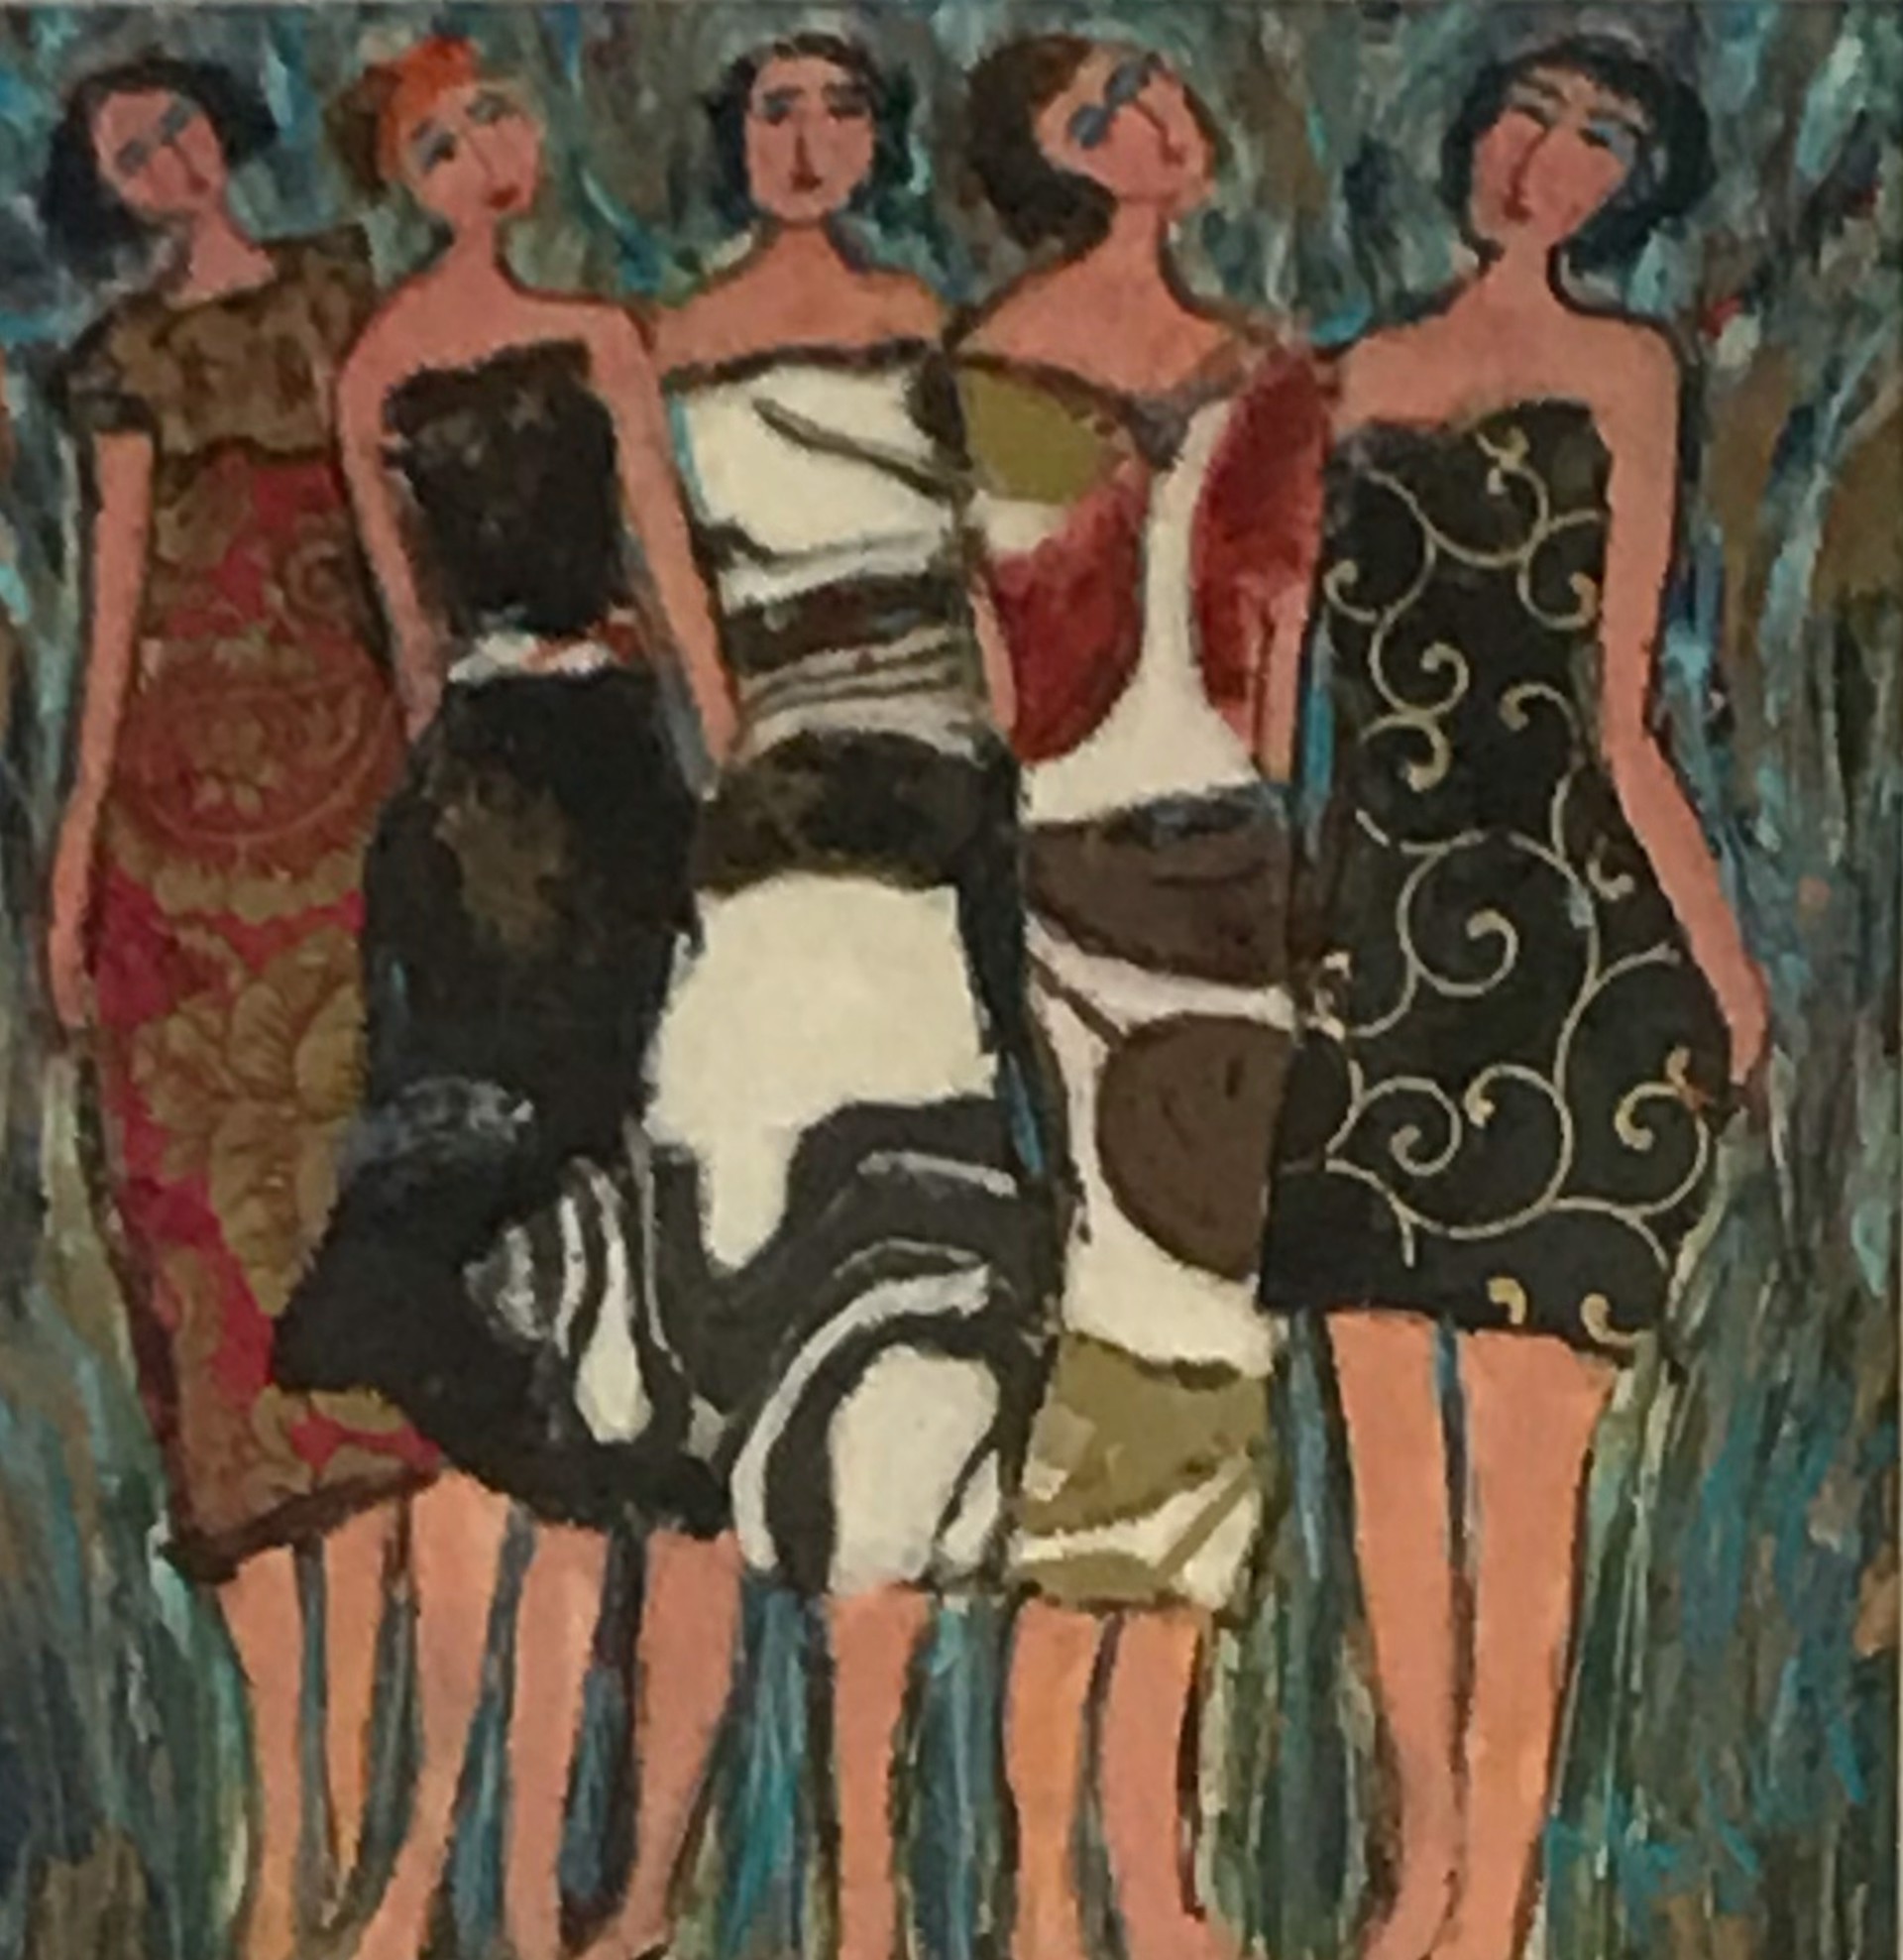 Fashionable Quintet by Holly Markhoff